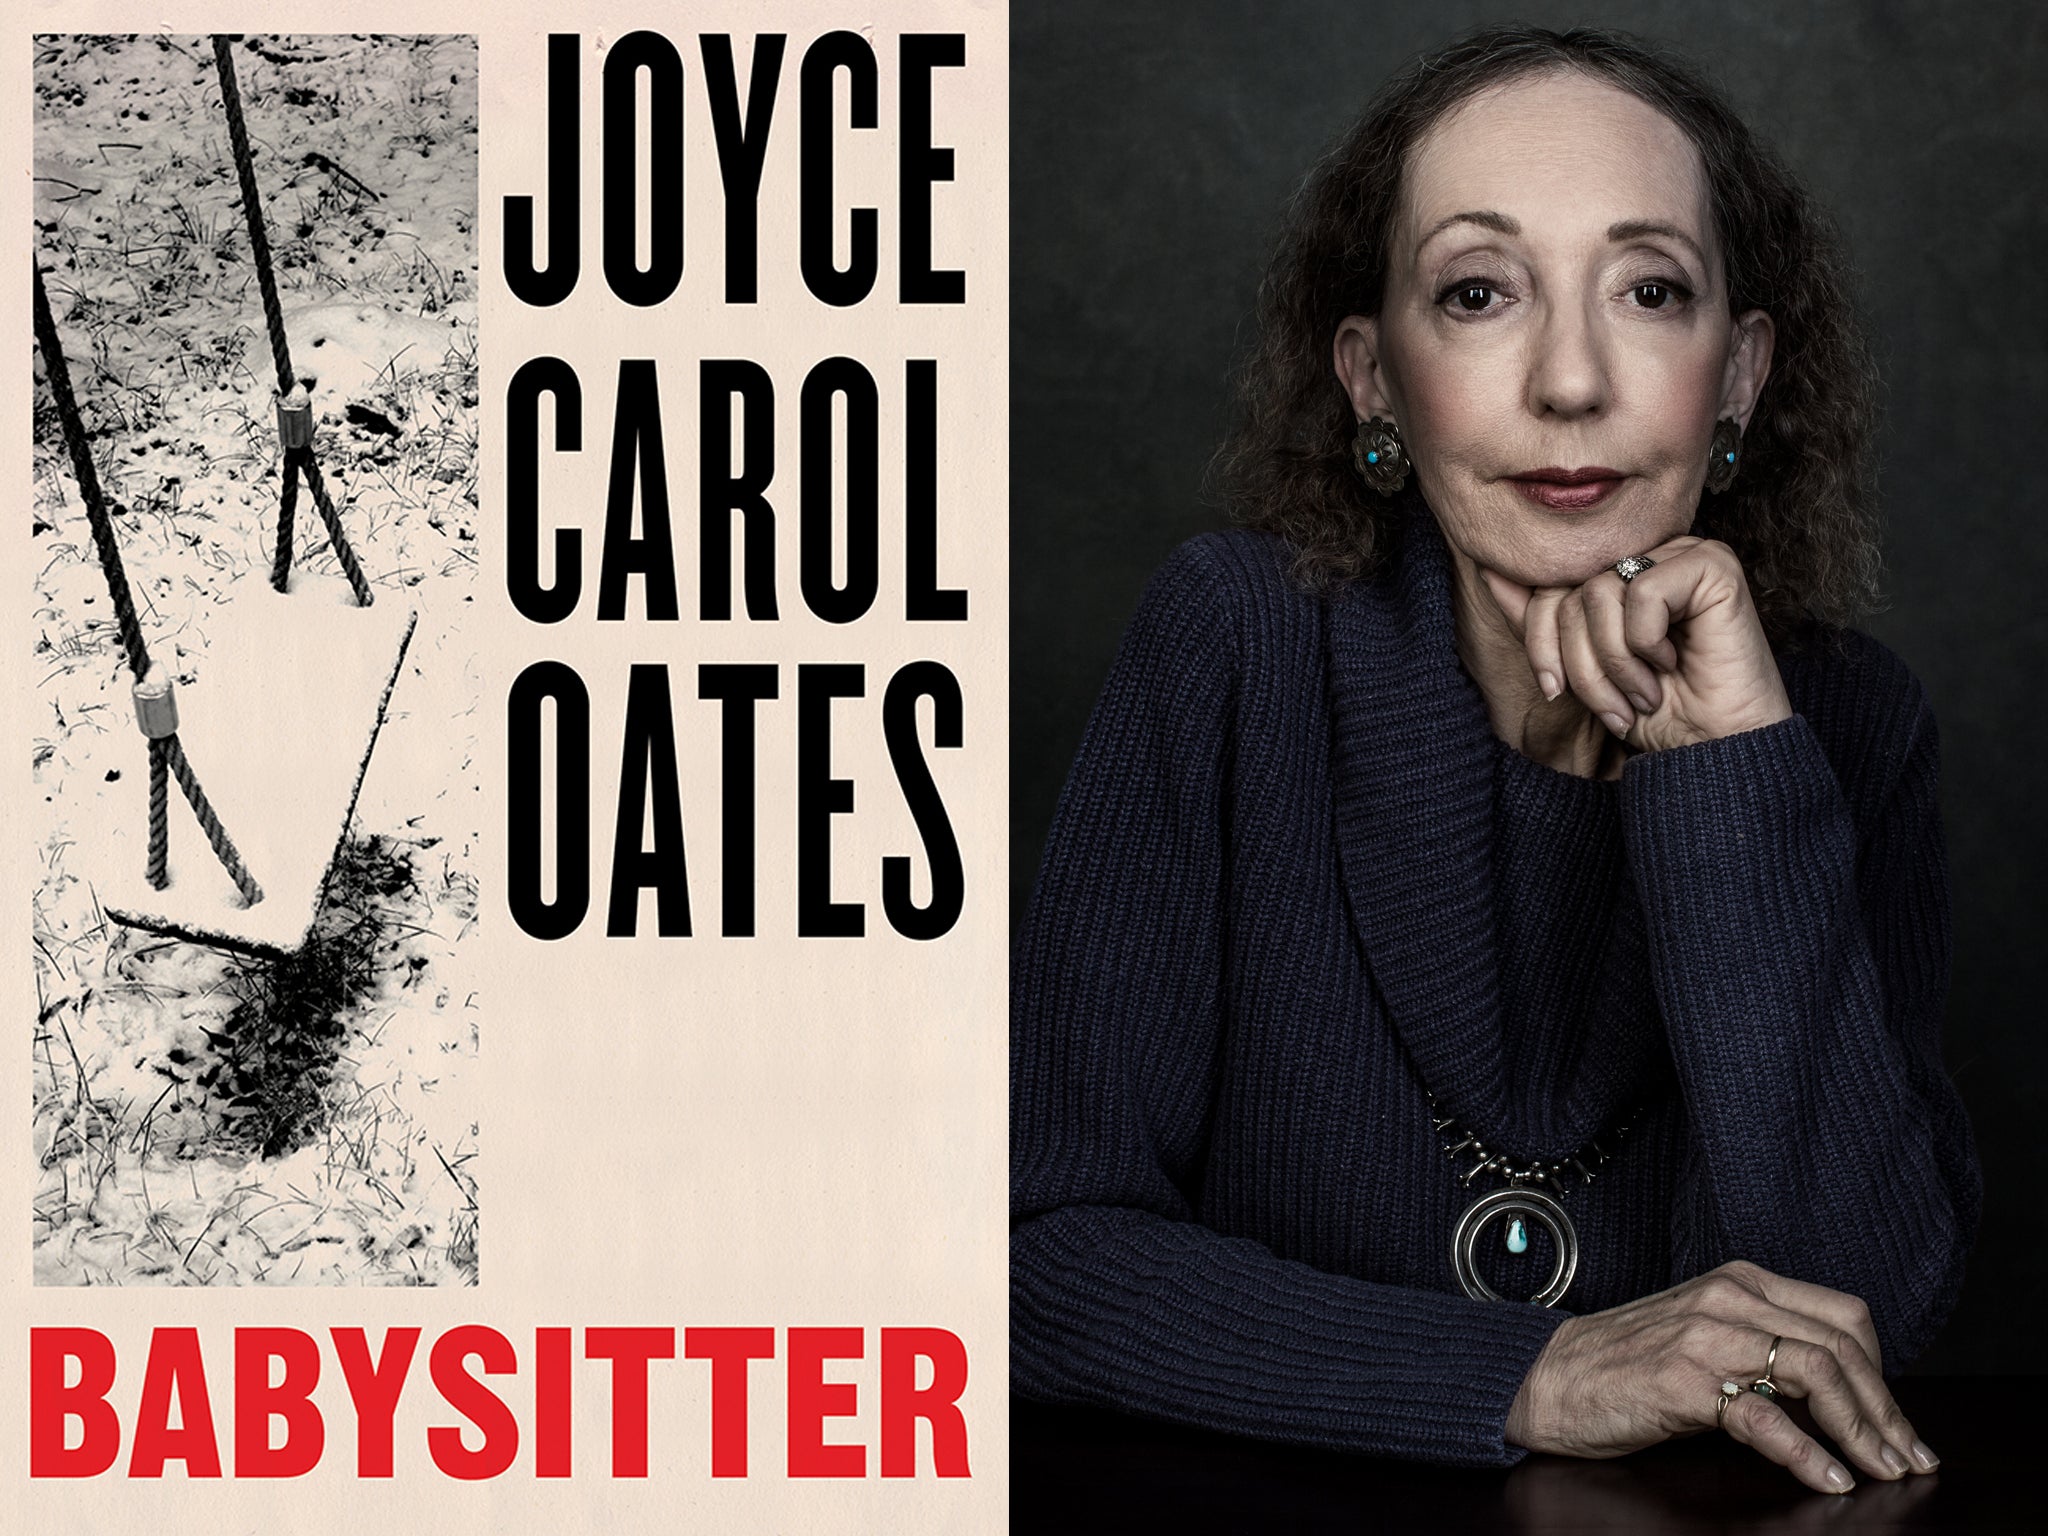 Joyce Carol Oates’s ‘Babysitter’, which began life as a short story, is a consuming, tense read